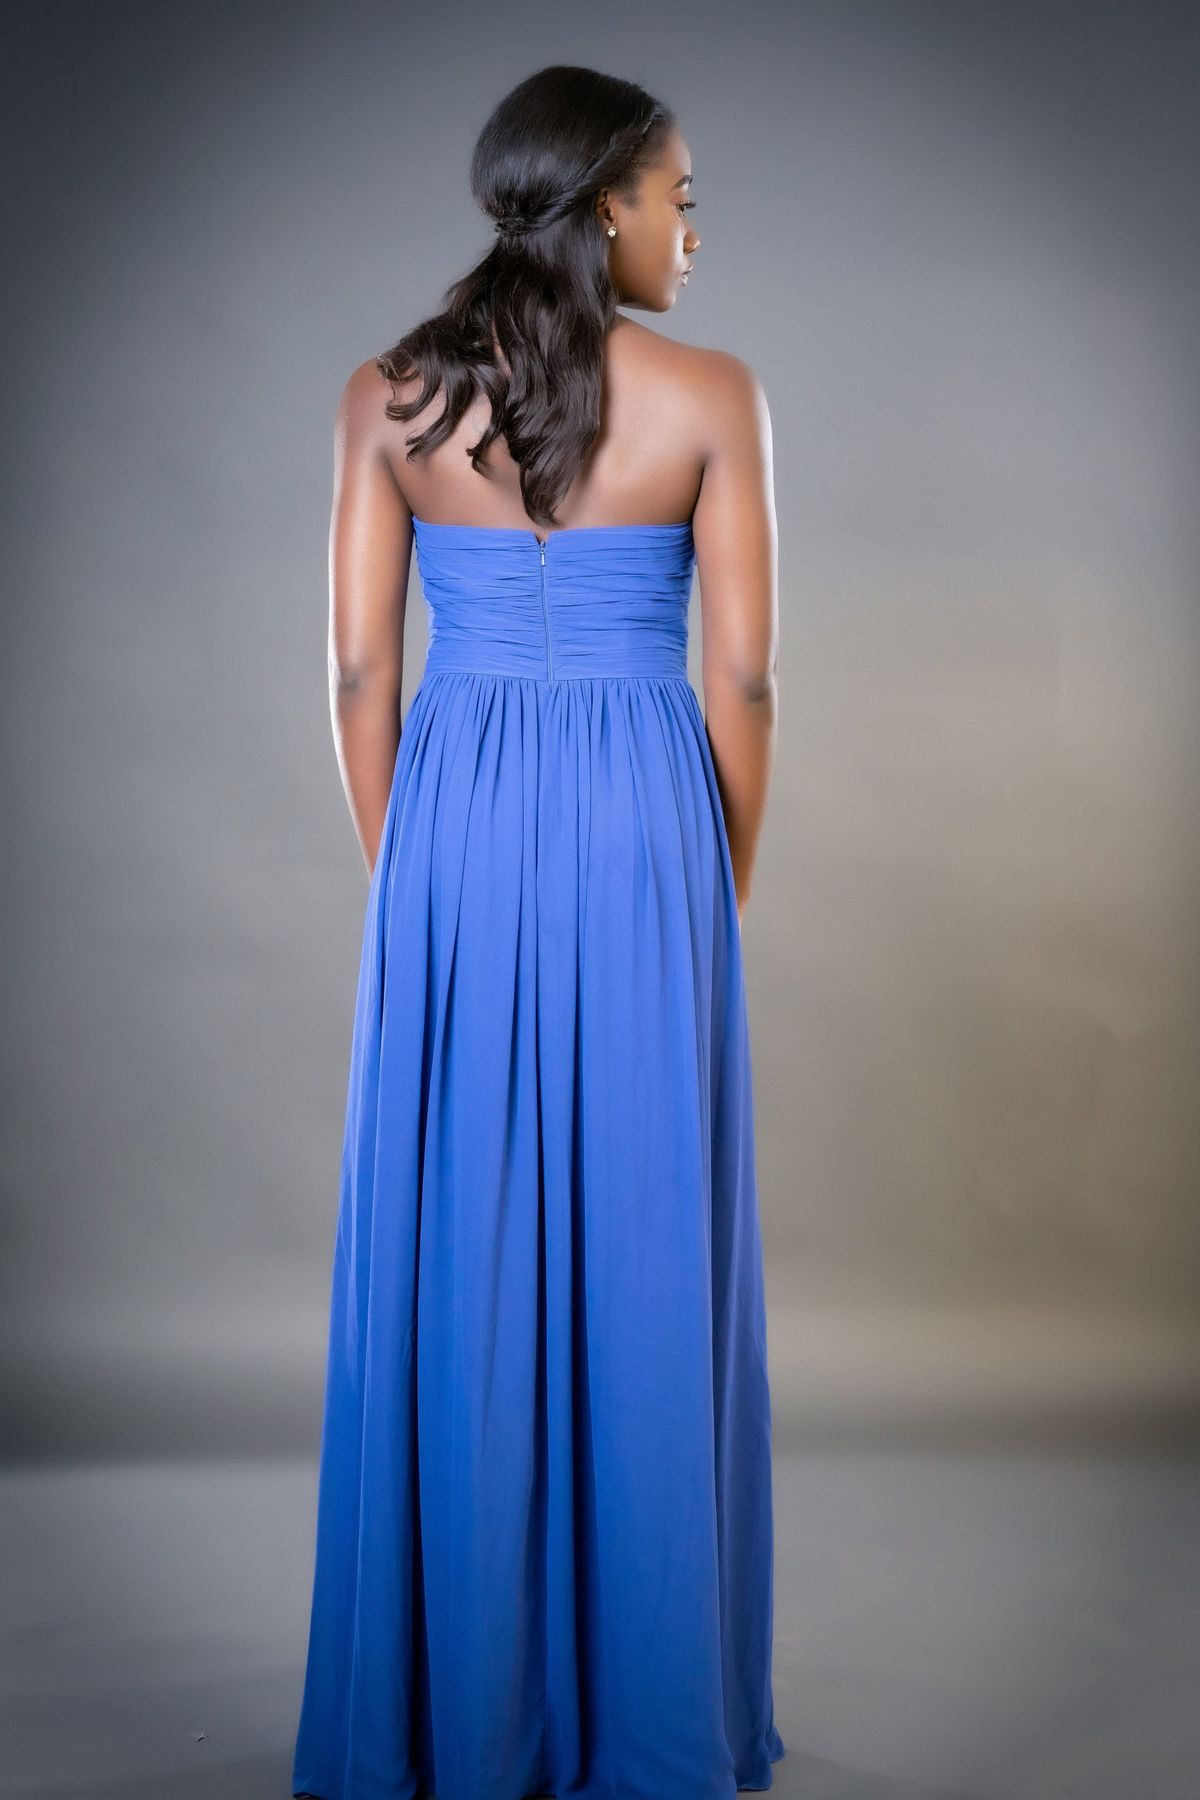 Style Phoebe Socialite Fashions Size 4 Bridesmaid Strapless Royal Blue Floor Length Maxi on Queenly